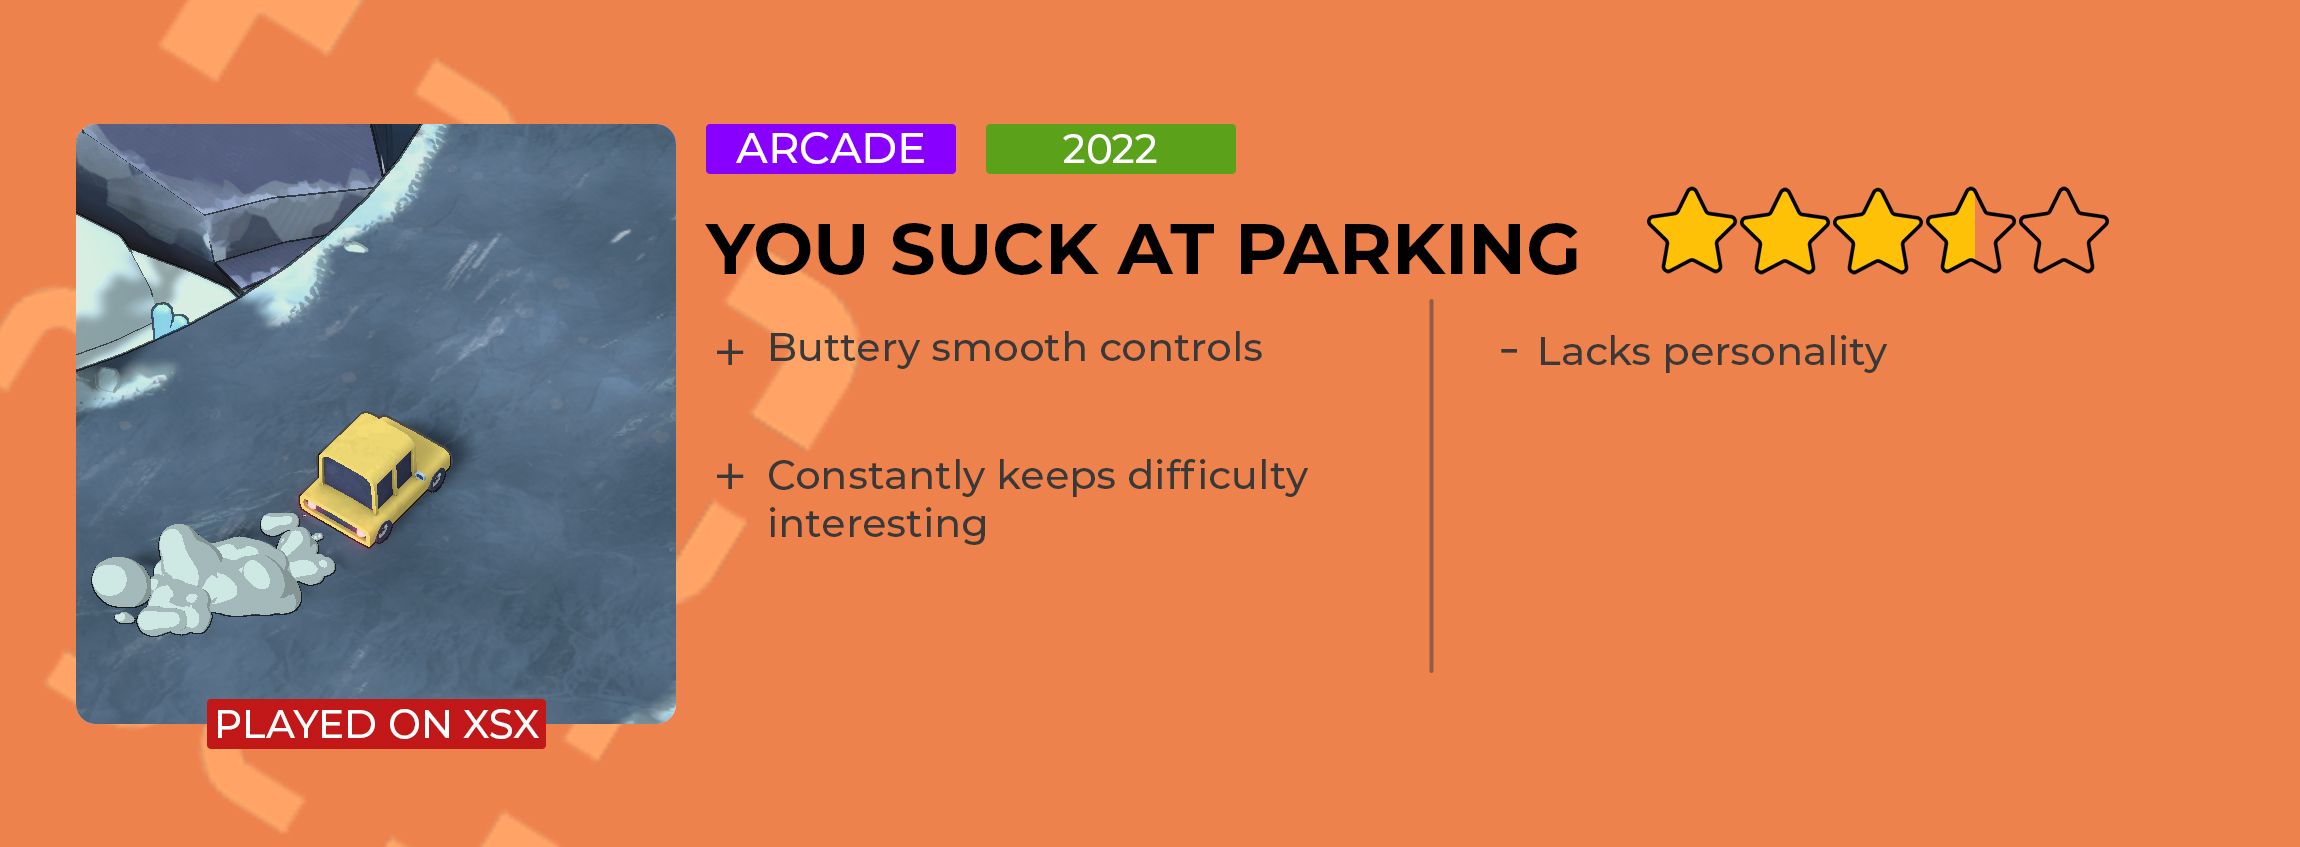 You Suck at Parking Review card